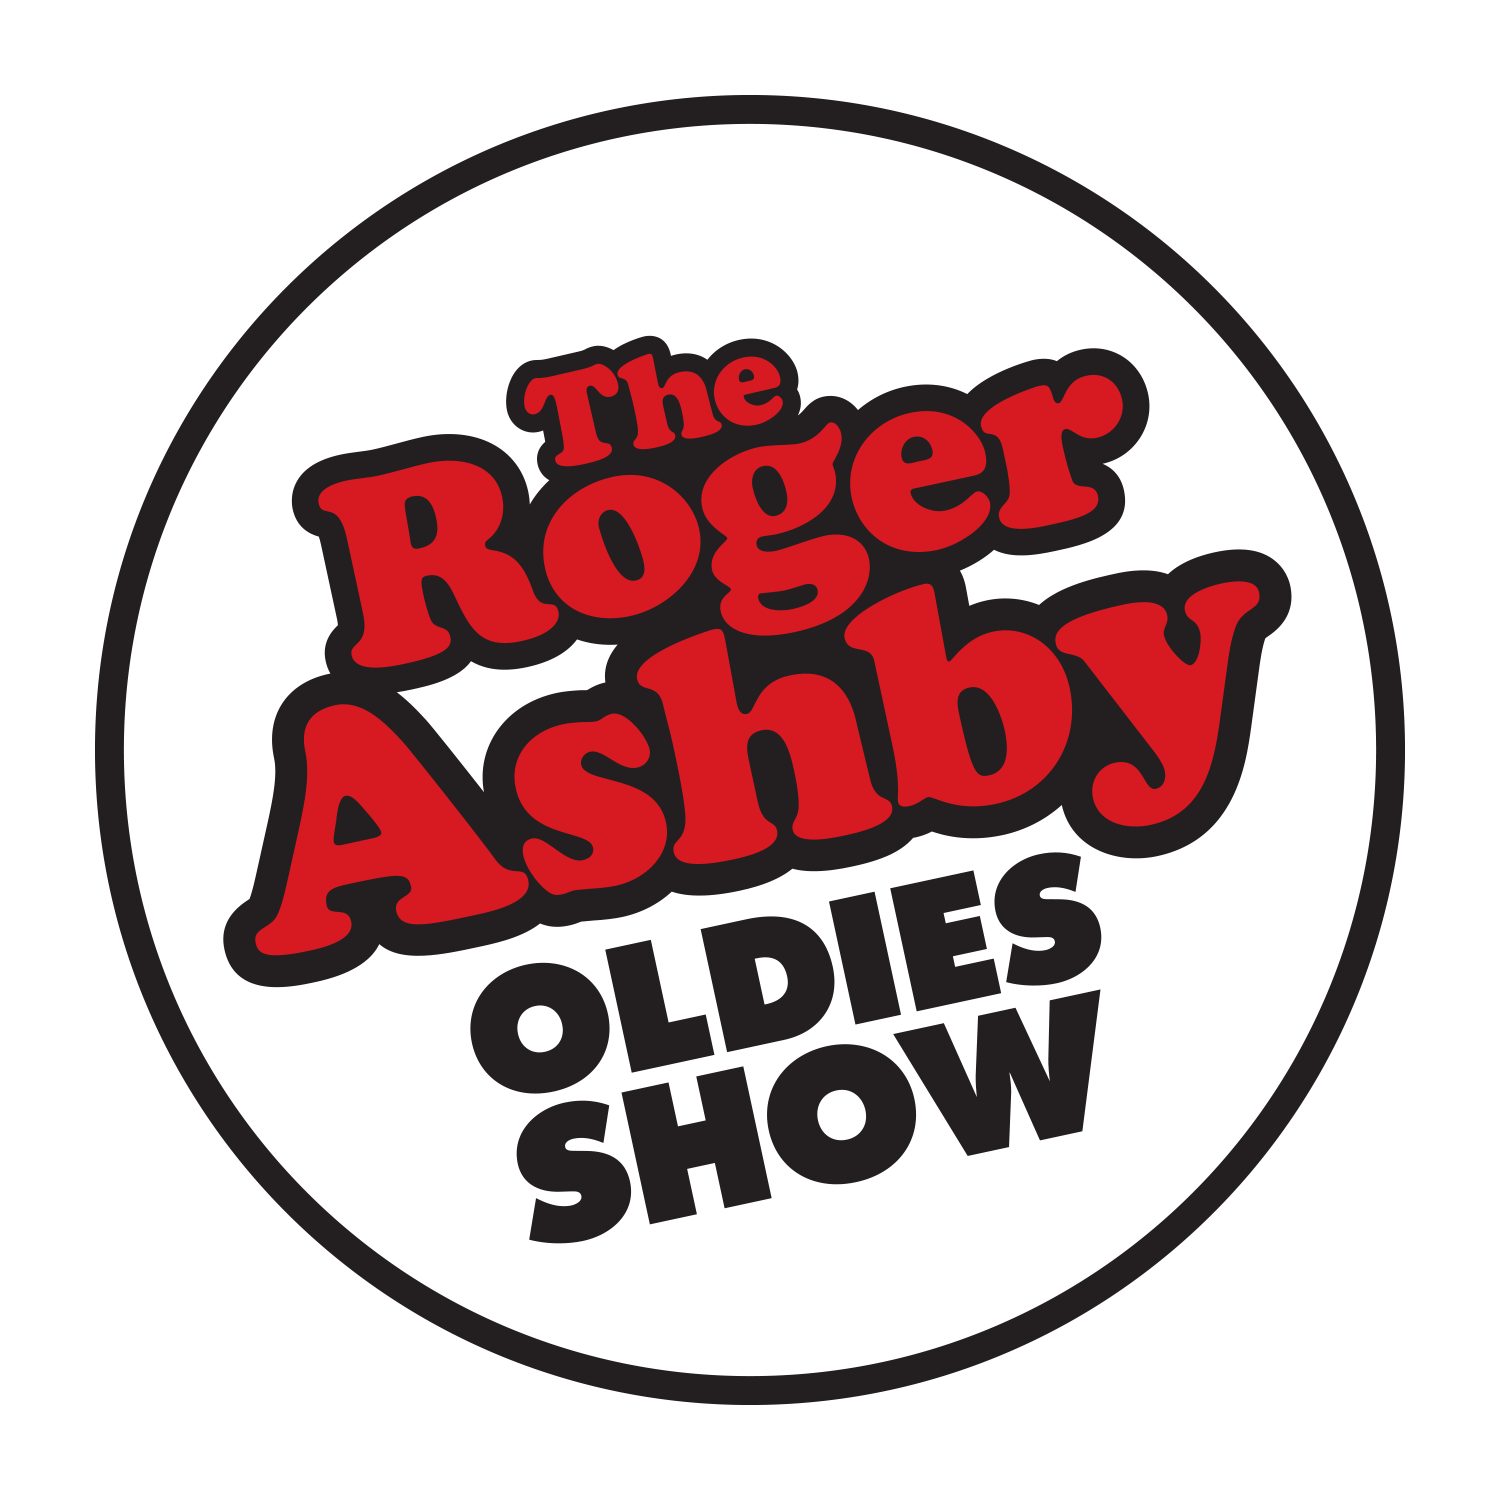 The Roger Ashby Oldies Show